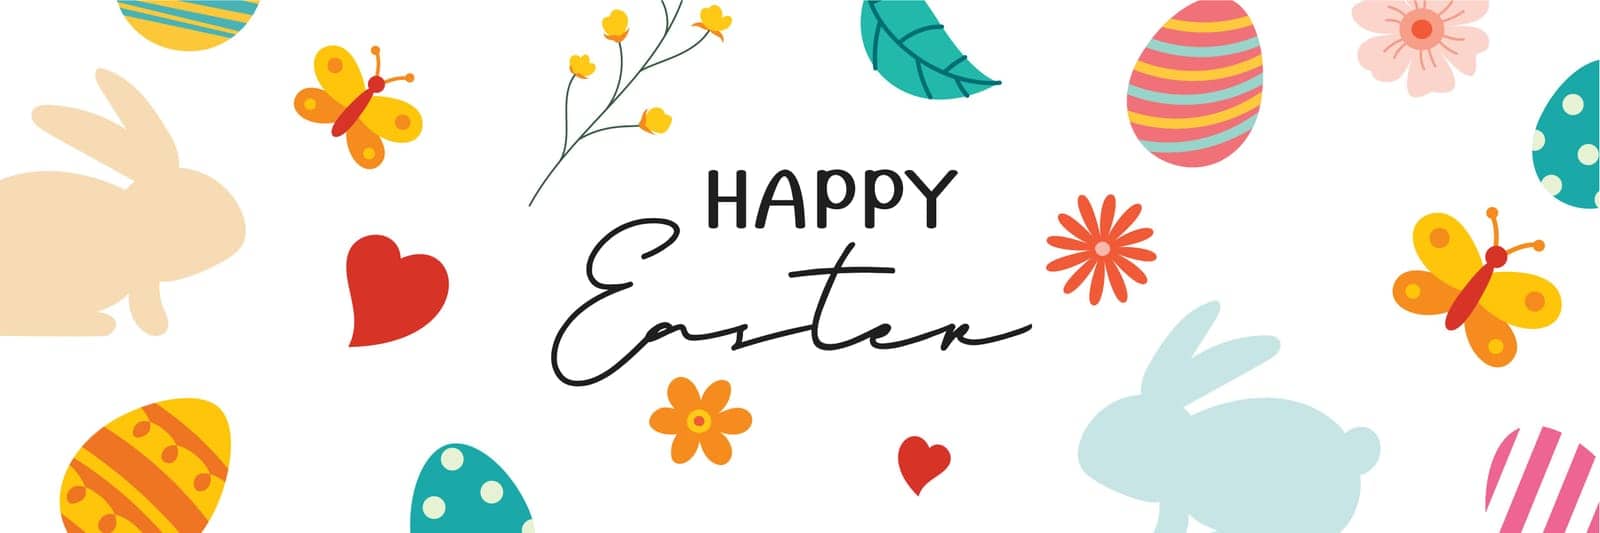 Happy easter egg greeting card background template.Can be used for cover, invitation, ad, wallpaper,flyers, posters, brochure.